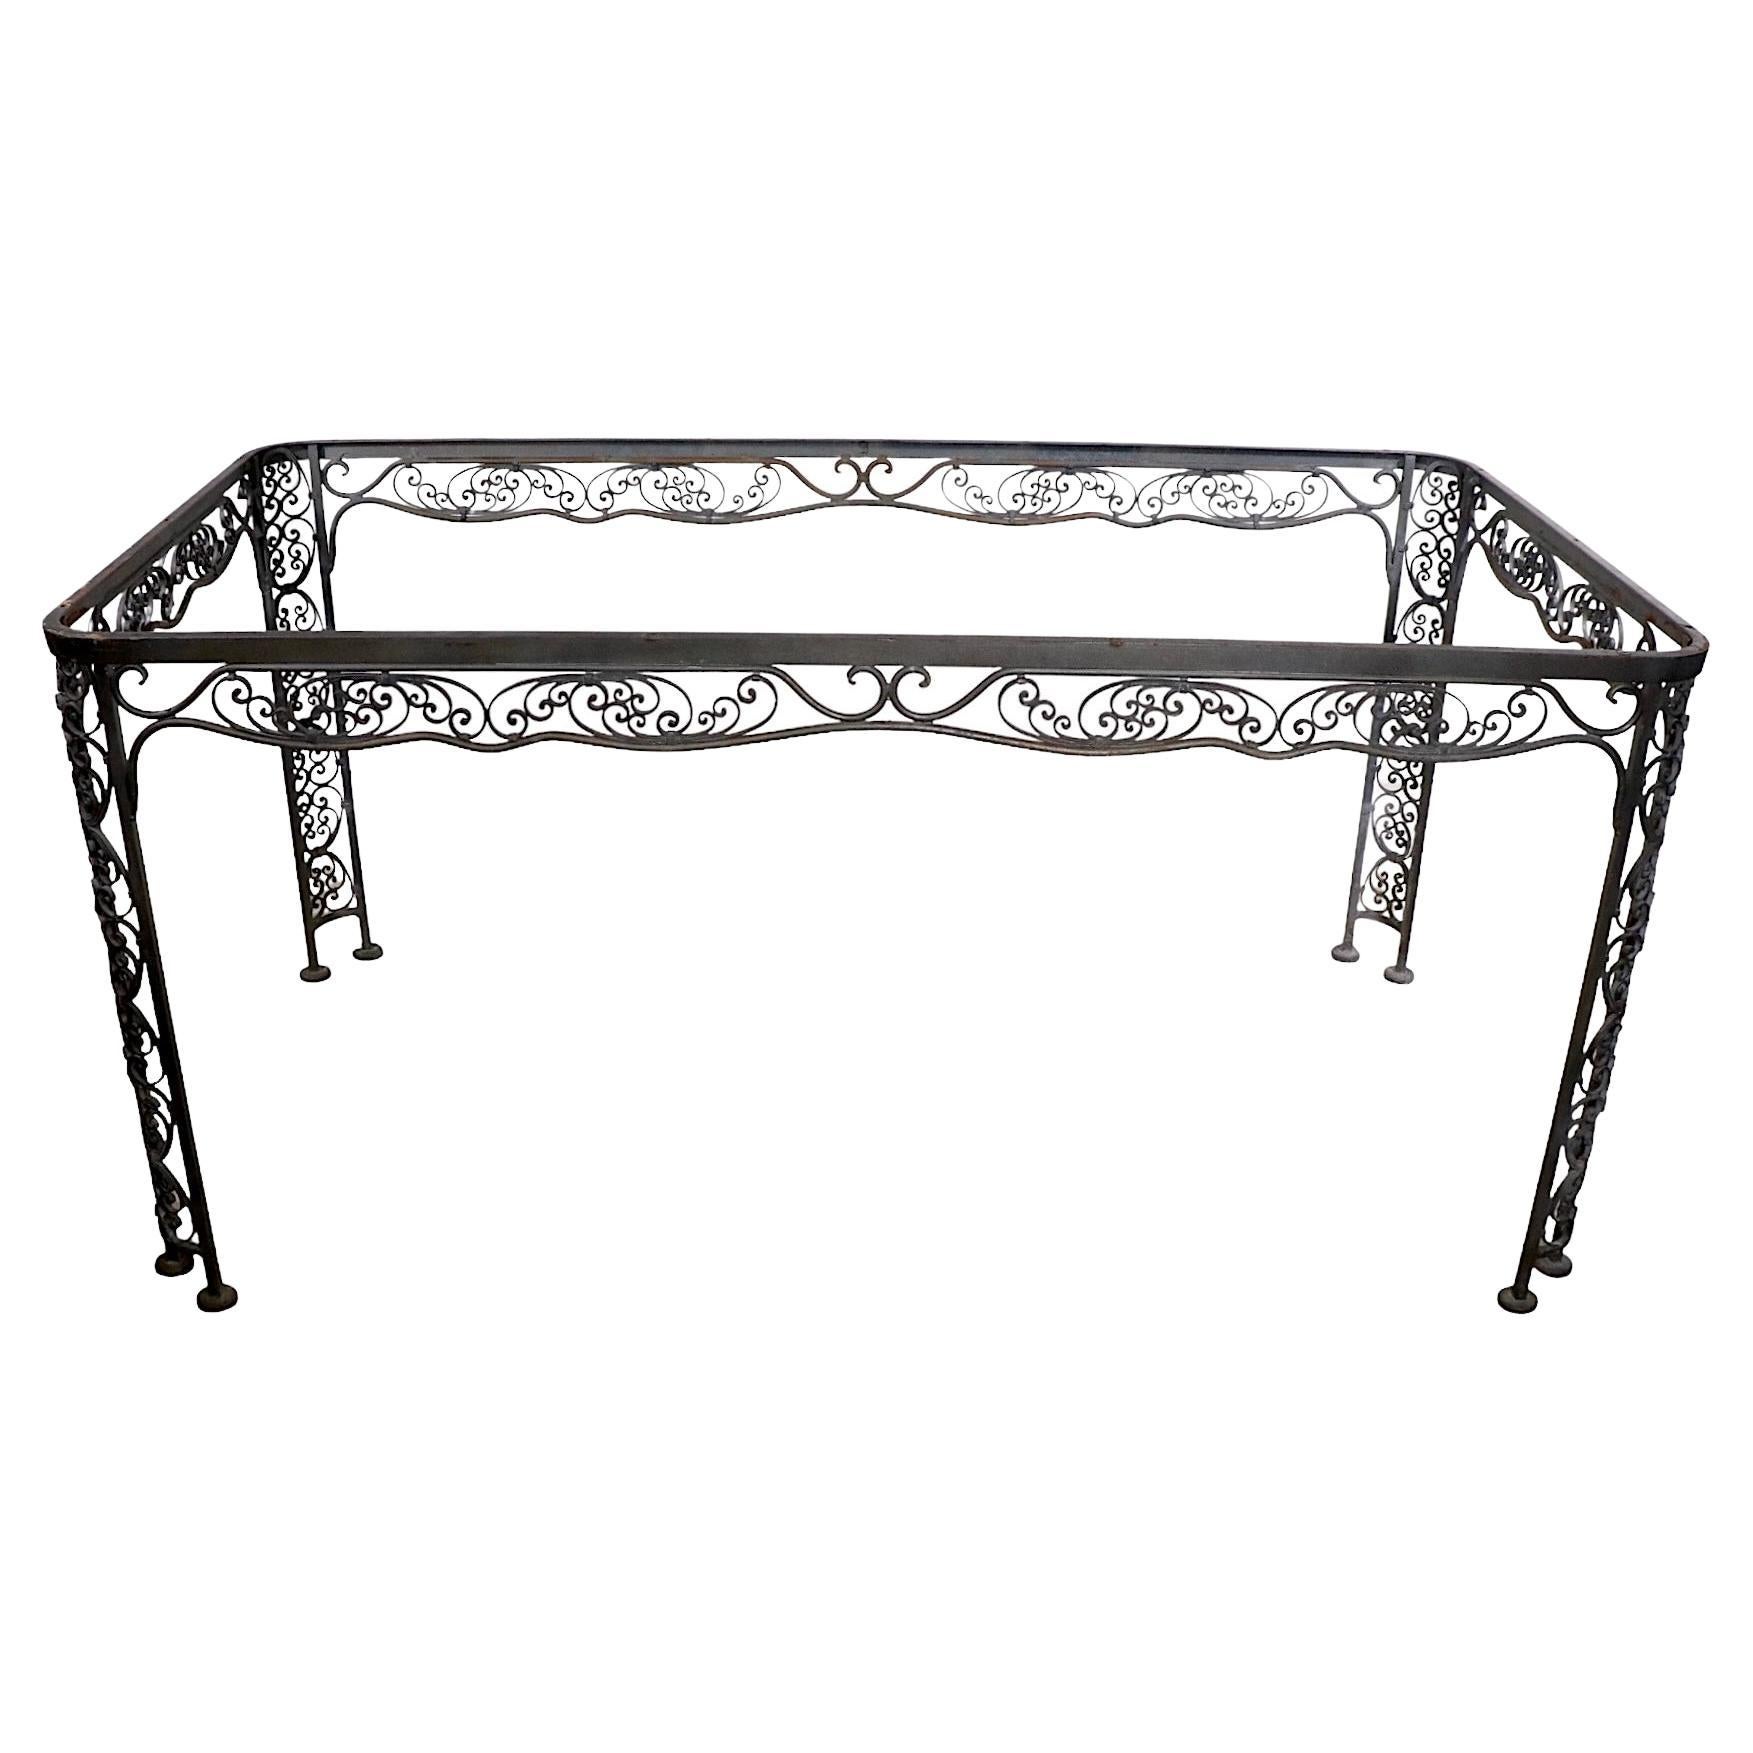 Ornate Wrought Iron Garden Patio Poolside Dining Table by Lee Woodard, c 1940's For Sale